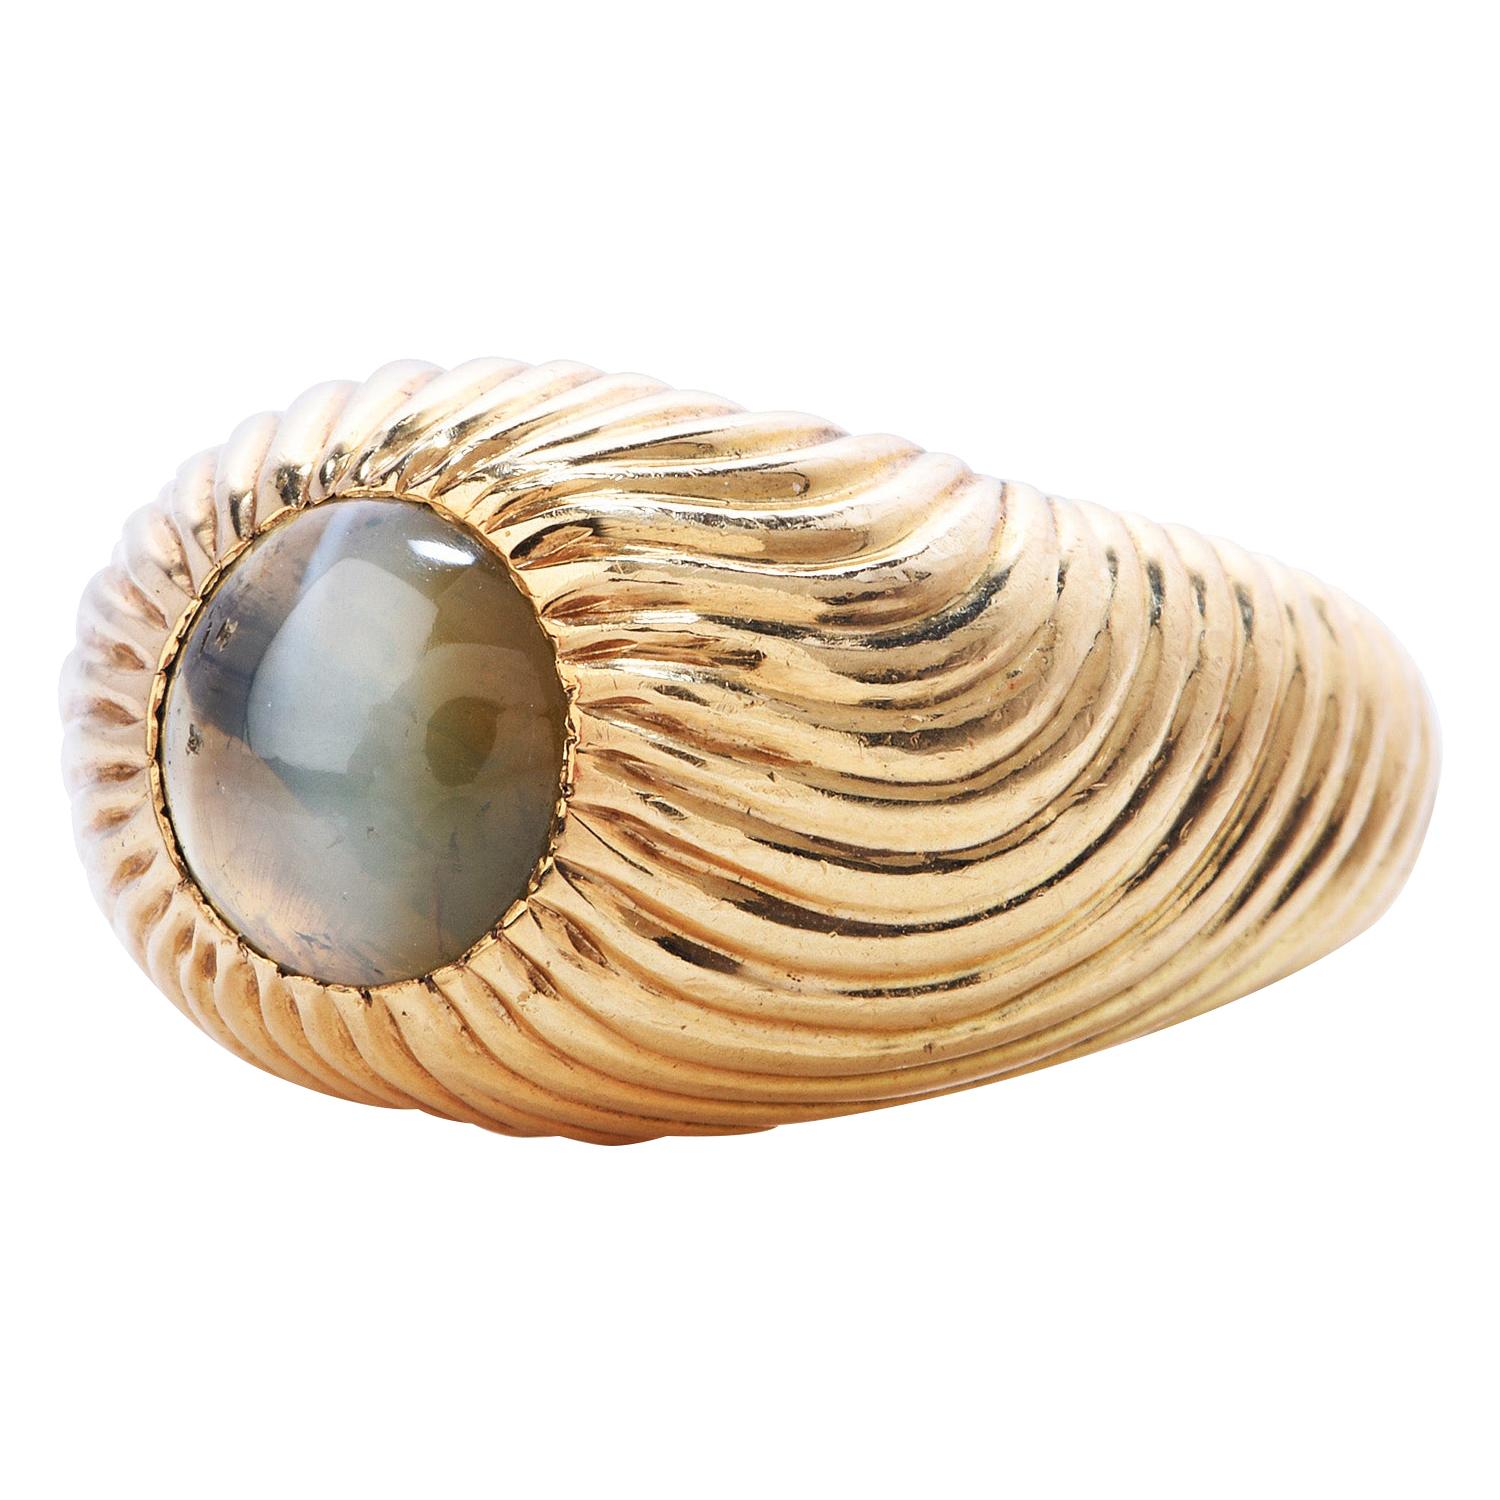 Buy Cats Eye Ring Online In India - Etsy India